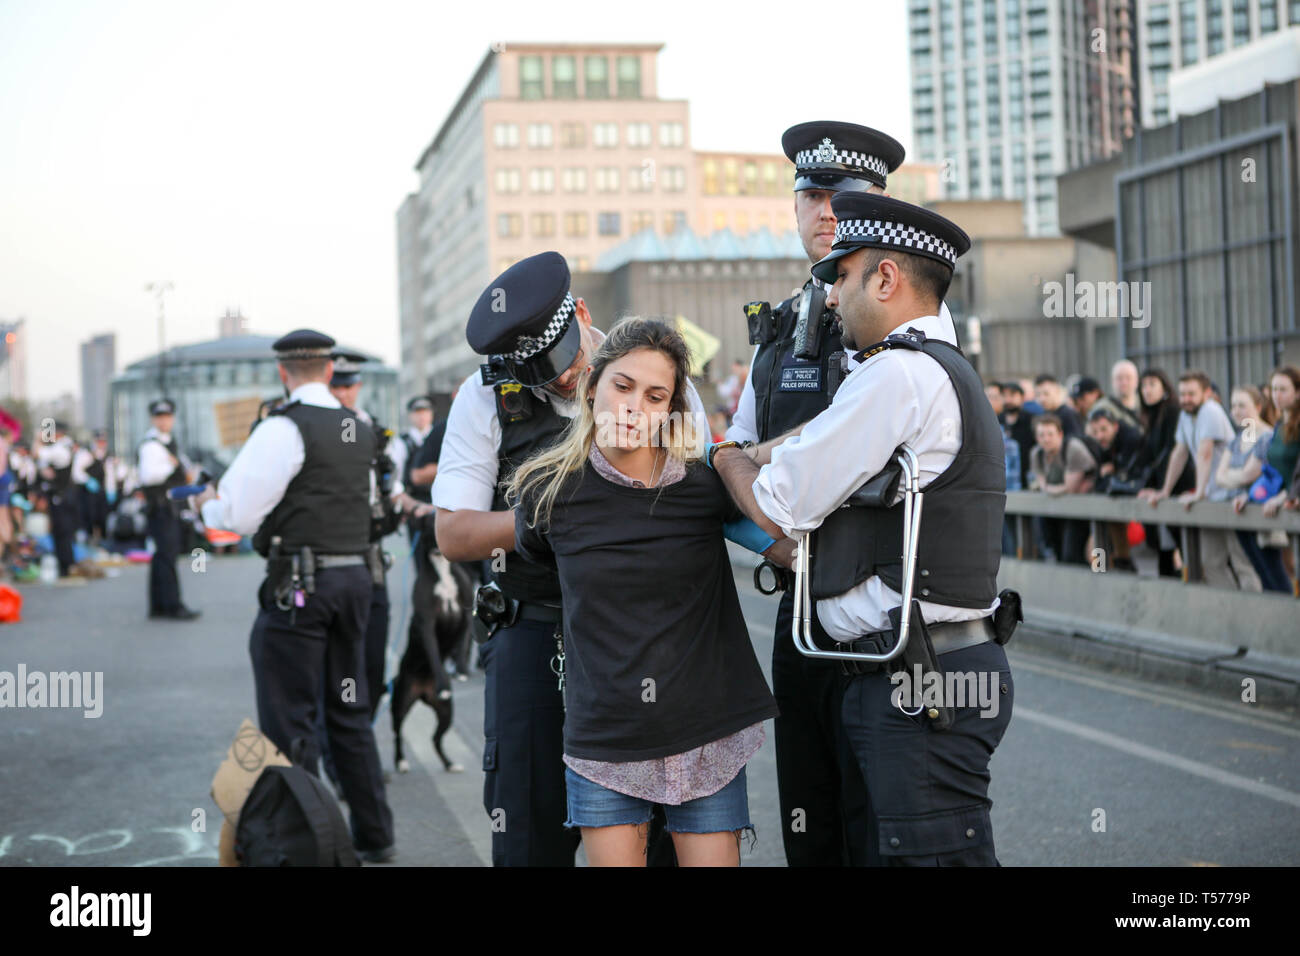 London, UK. 21st Apr 2019.  A massive police operation with mass arrests of environmental campaign group Extinction Rebellion from Waterloo Bridge. Credit: Penelope Barritt/Alamy Live News Stock Photo